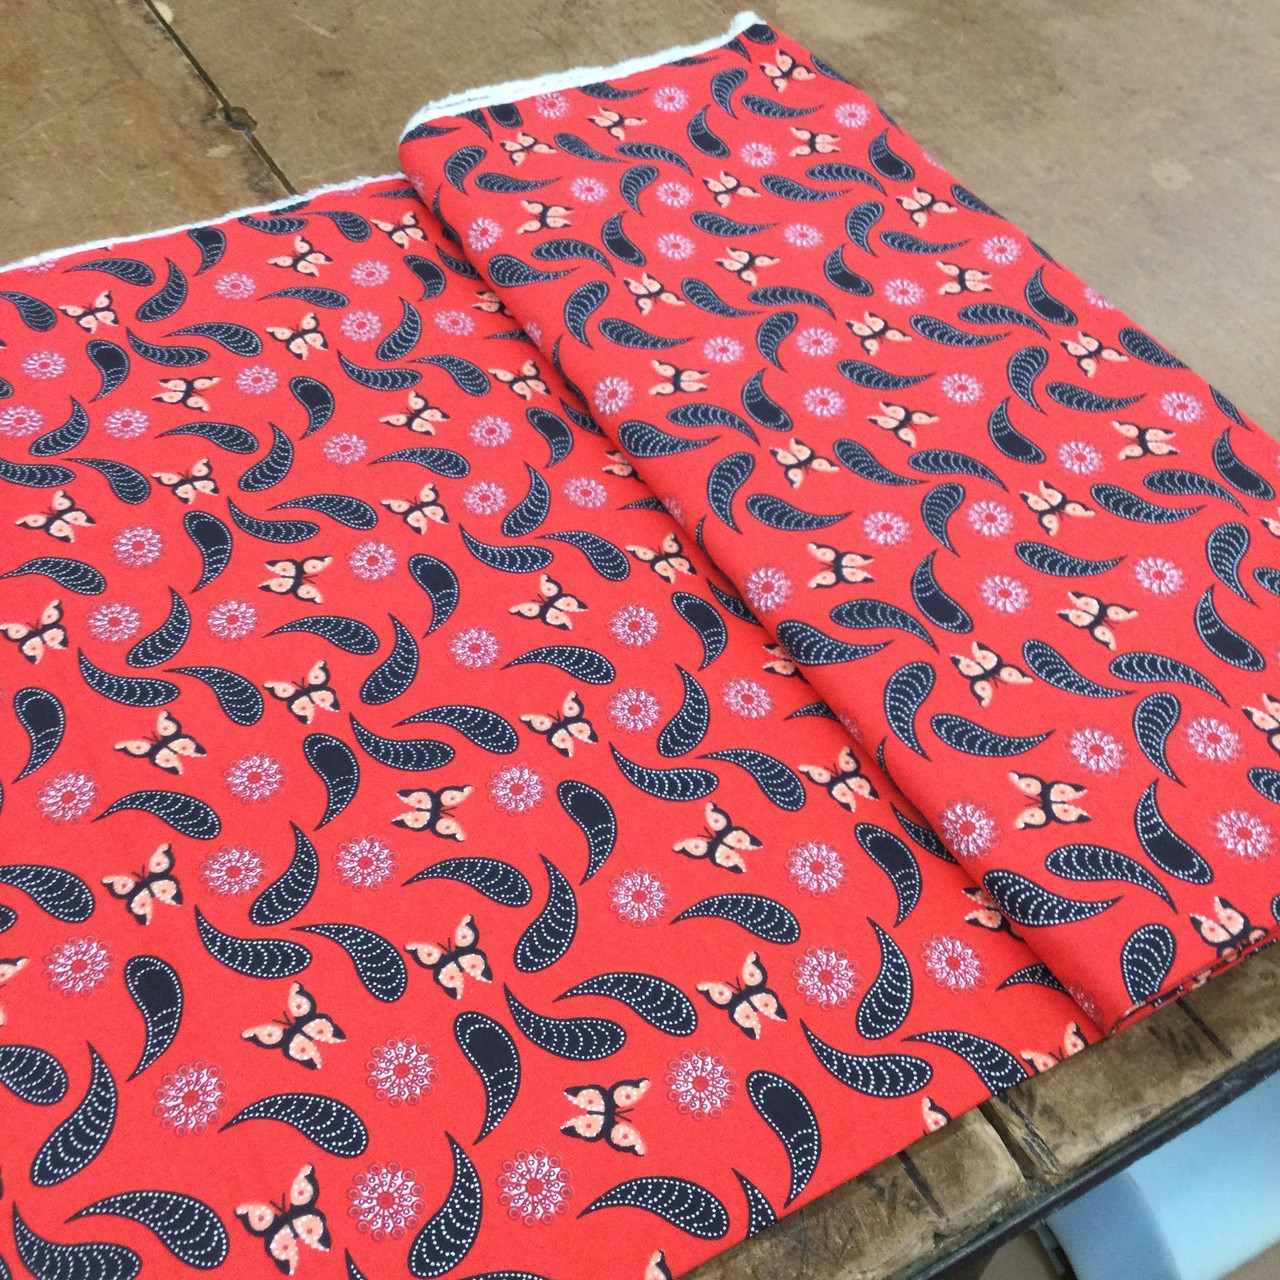 Butterflies and Motifs in Red and Black Flannel Fabric, 44 Wide, 100%  Cotton